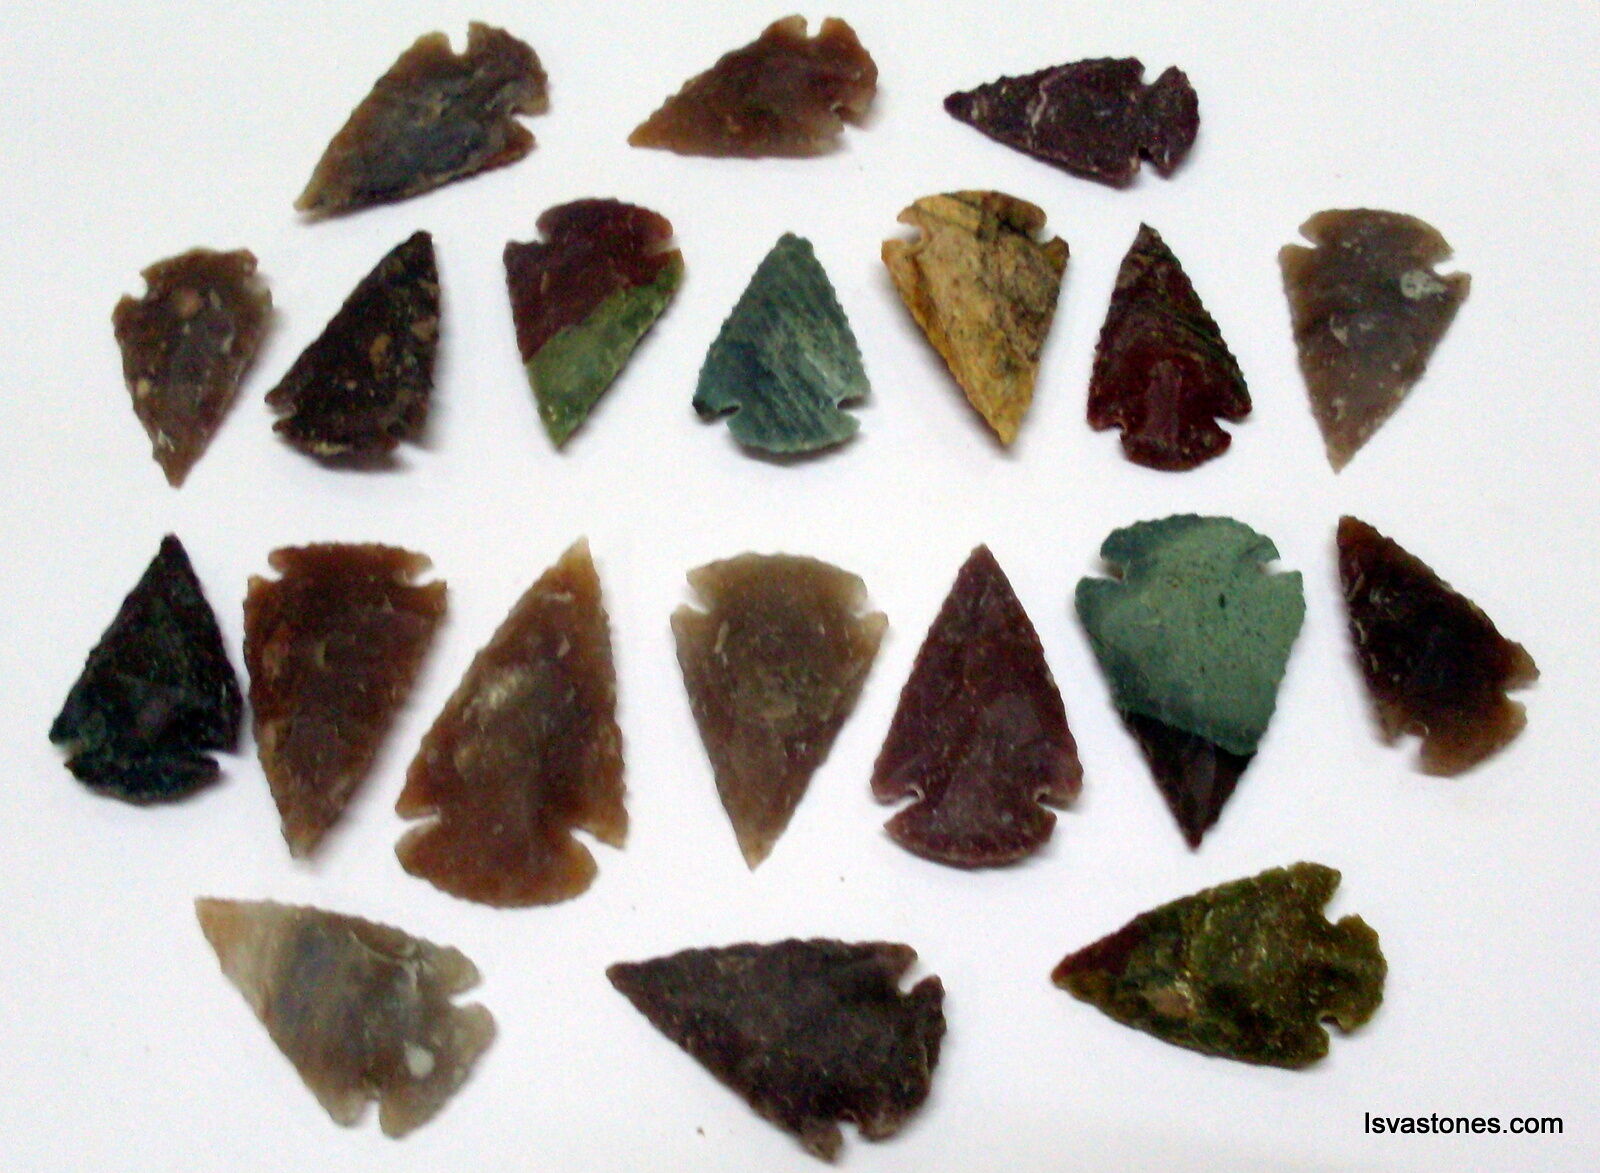 *** 35 pc lot flint arrowhead OH collection project spear points knife blade ***